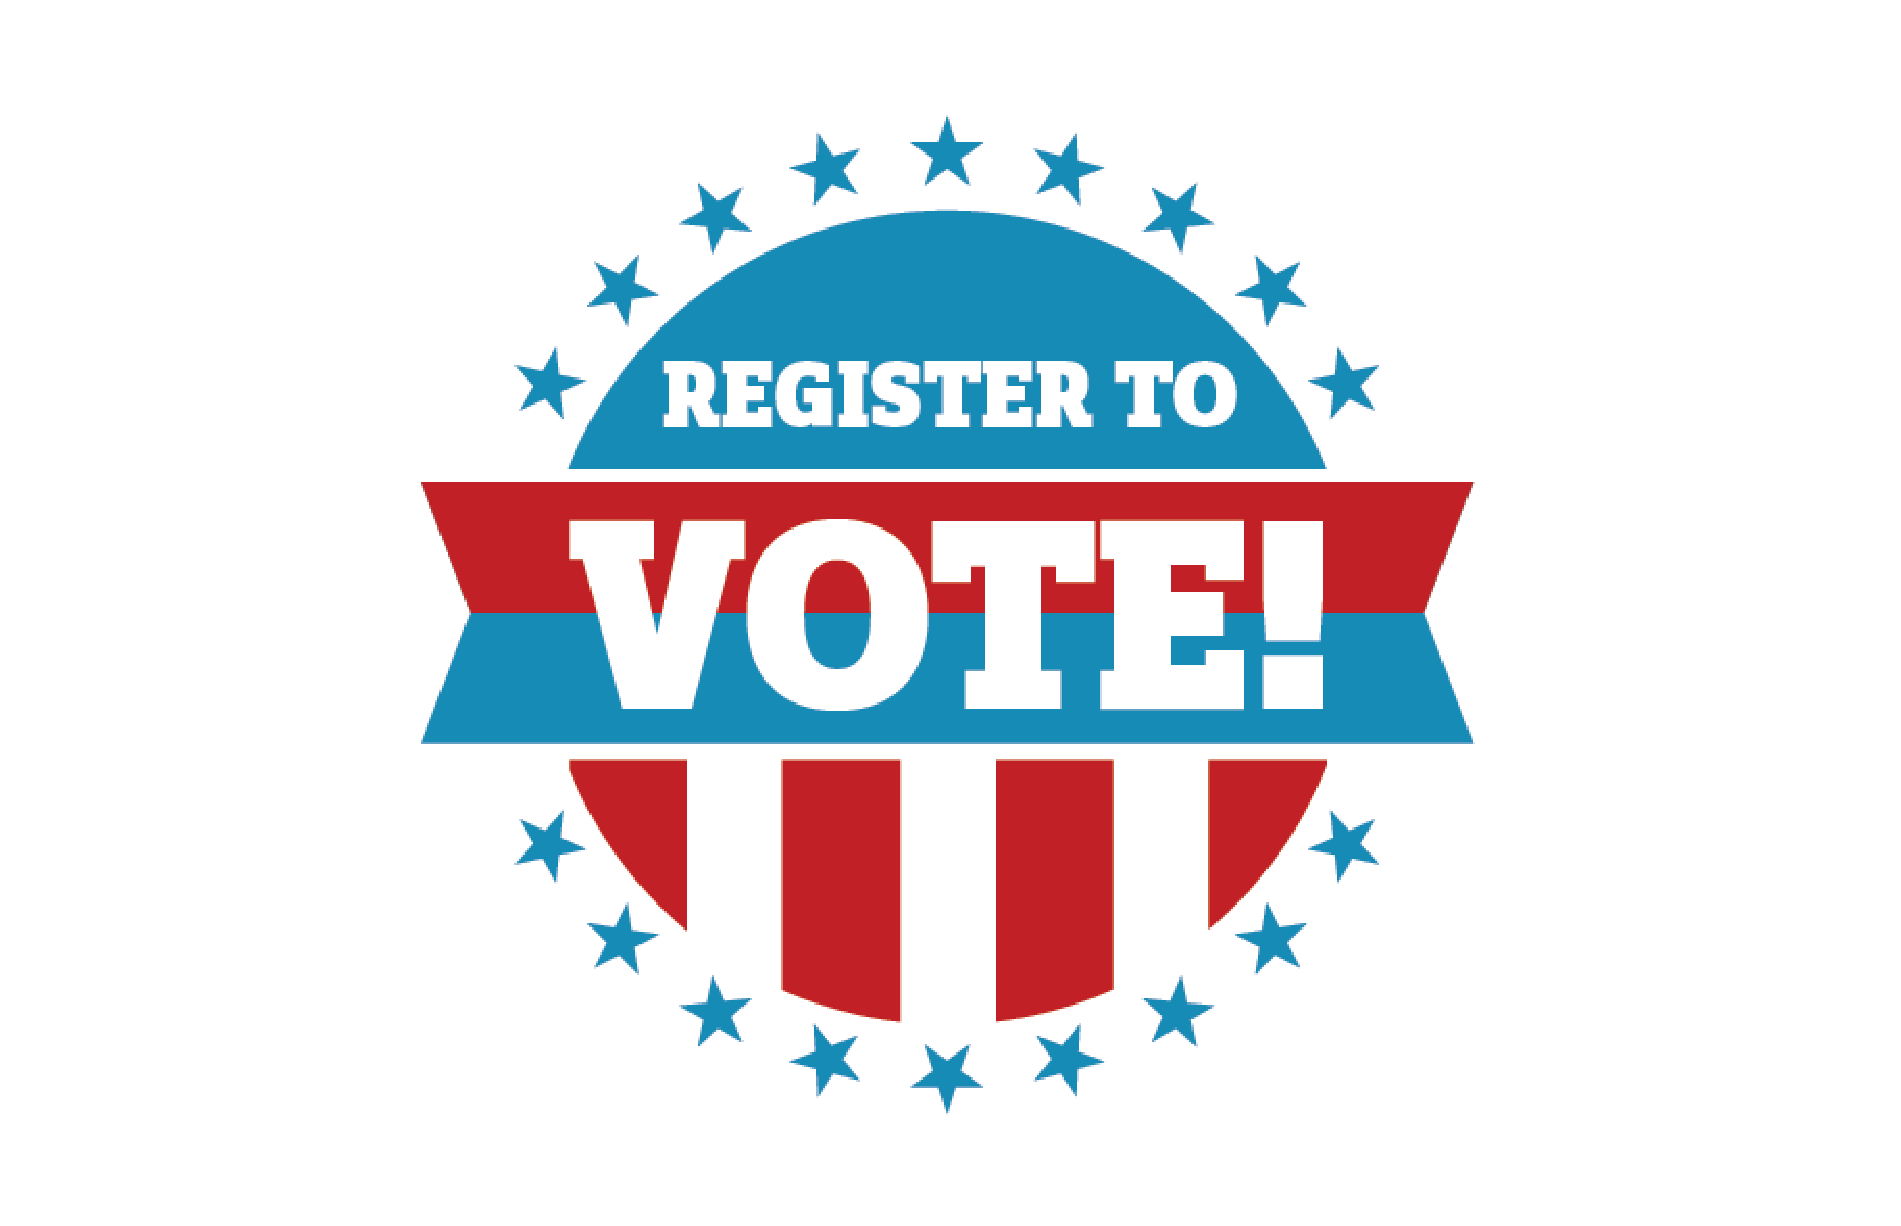 Red, white, and blue circular logo with banner across the middle that reads "Register To Vote" Registrars of Voters are tasked with many responsibilities, including tracking voter registration.